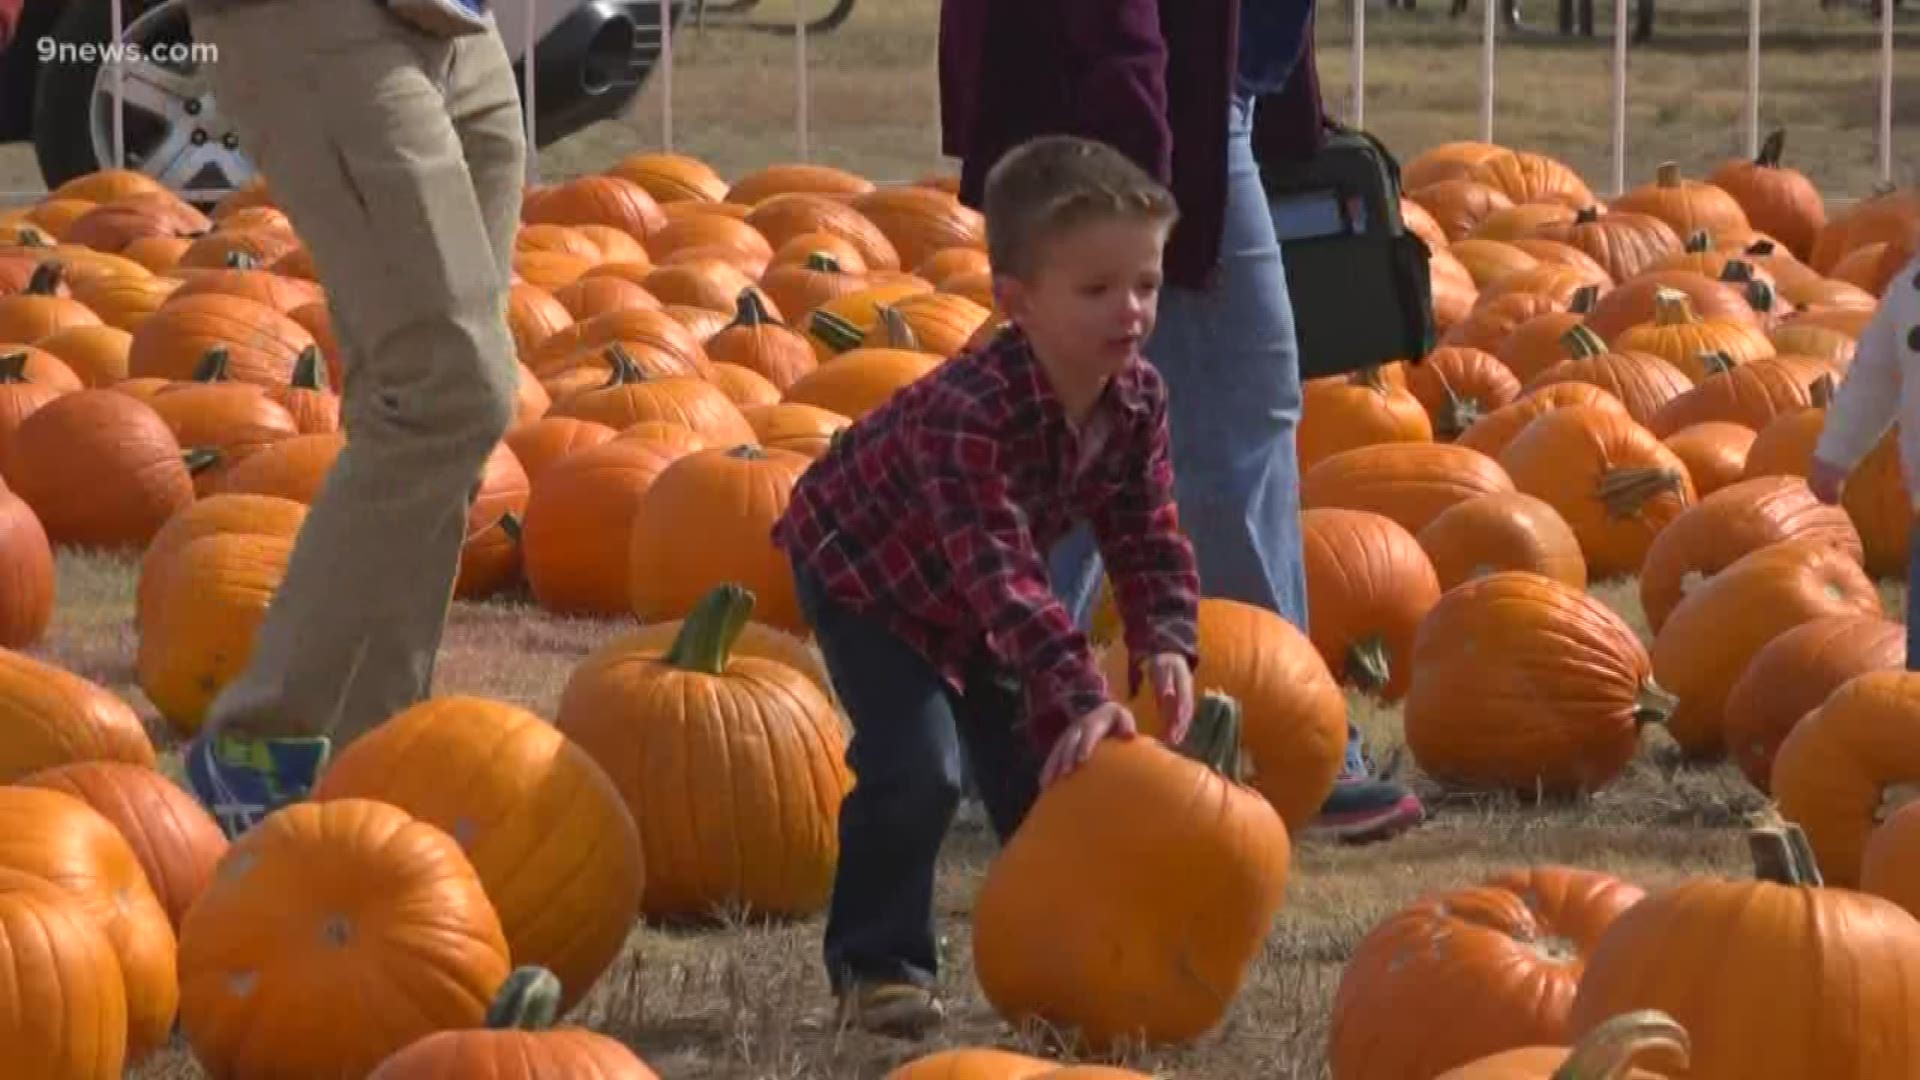 Colorado's most unique fall festival is back! Aurora's Punkin Chunkin lets teams compete to launch pumpkins as fast and far as possible.